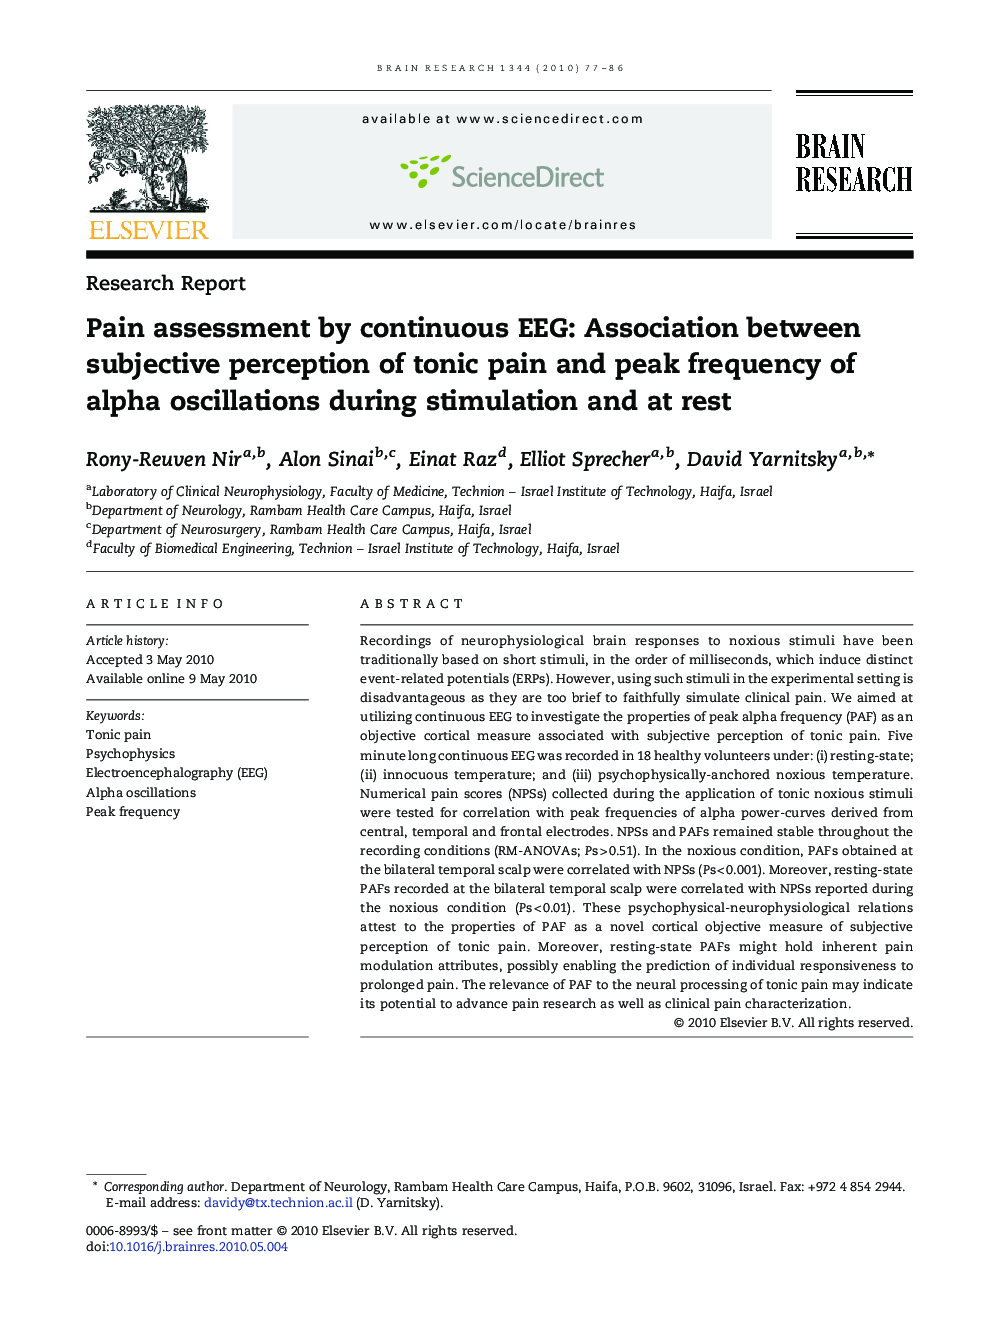 Pain assessment by continuous EEG: Association between subjective perception of tonic pain and peak frequency of alpha oscillations during stimulation and at rest